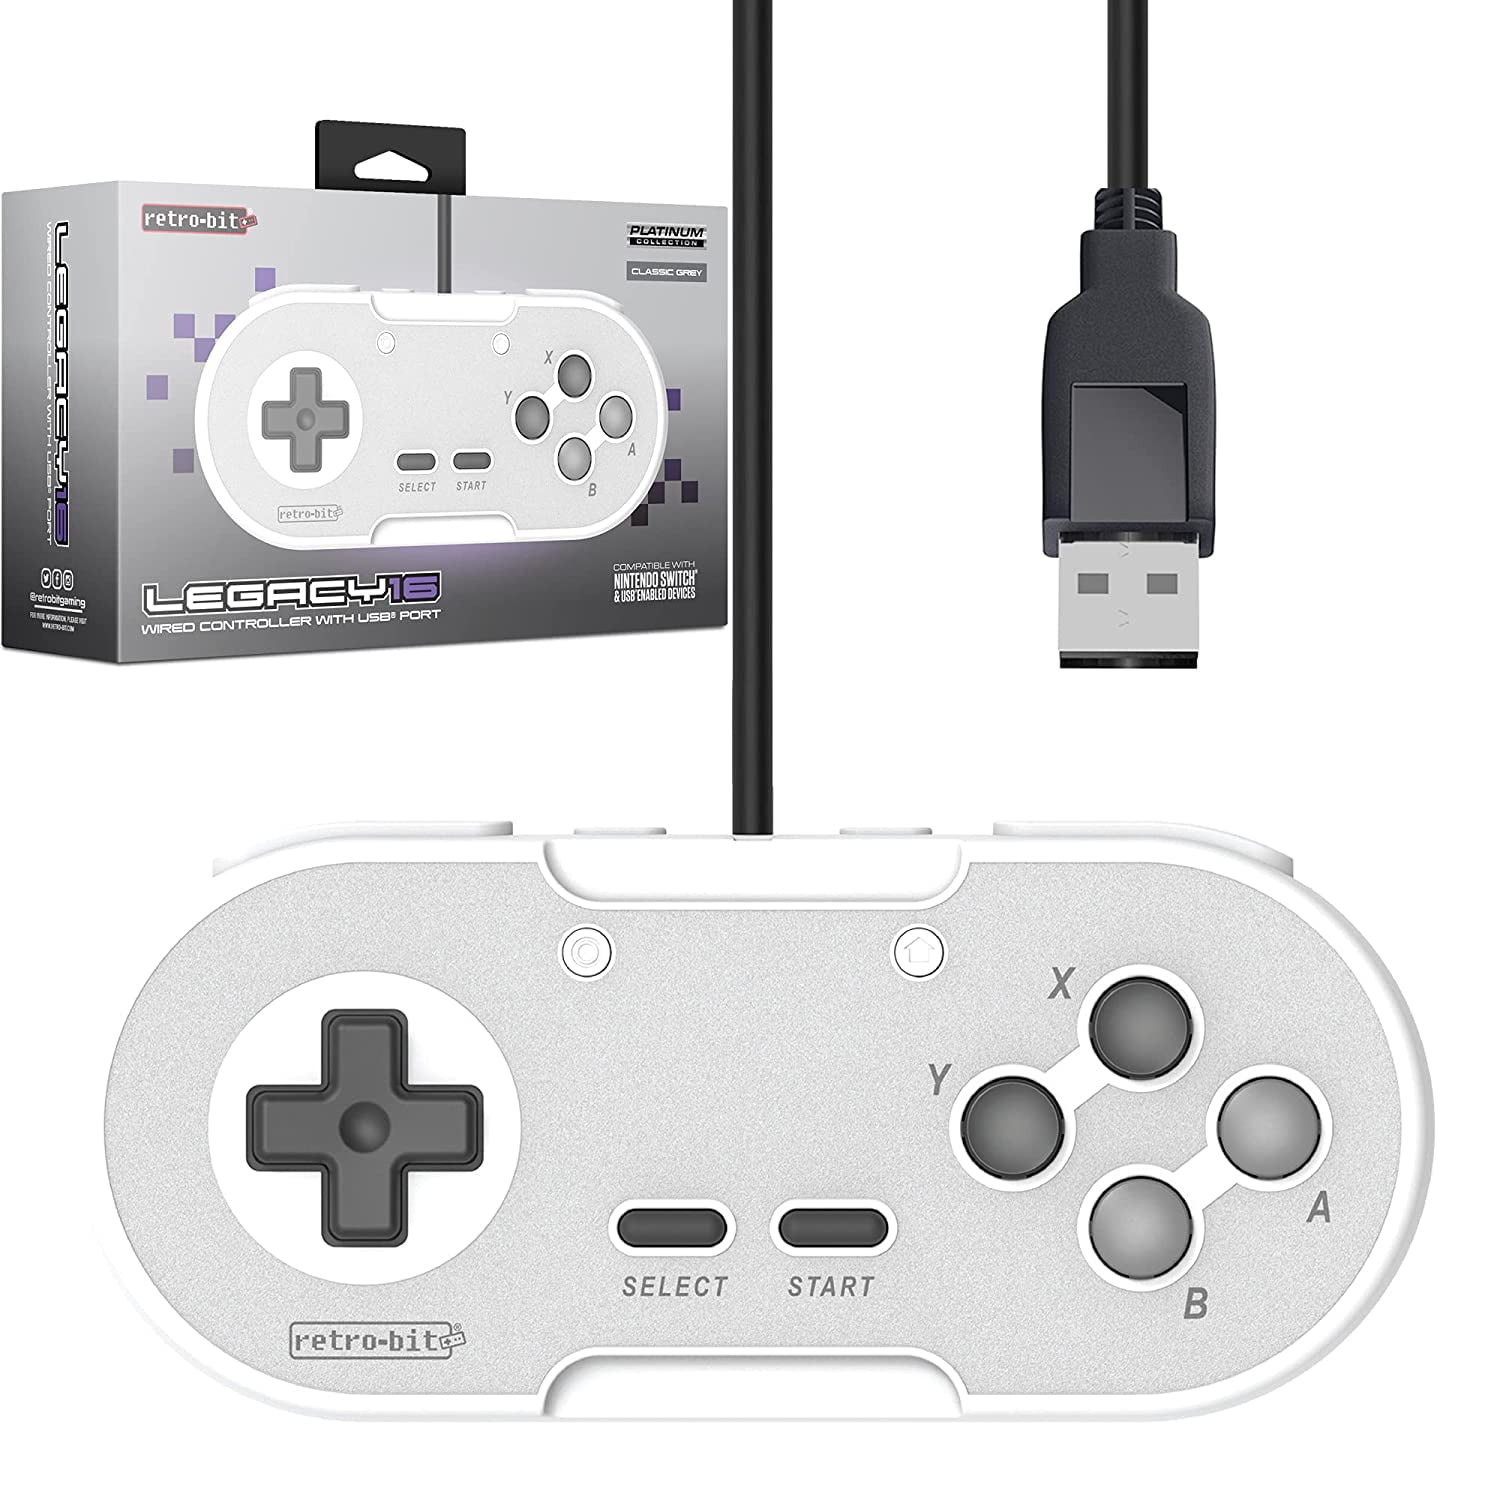 lindre pakke tilstrækkelig Retro-Bit Legacy 16 Wired USB Controller - Features Home, SS & ZL/ZR  Buttons - for Switch, PC, MacOS, RetroPie, Raspberry Pi - (Classic Gray) -  Walmart.com